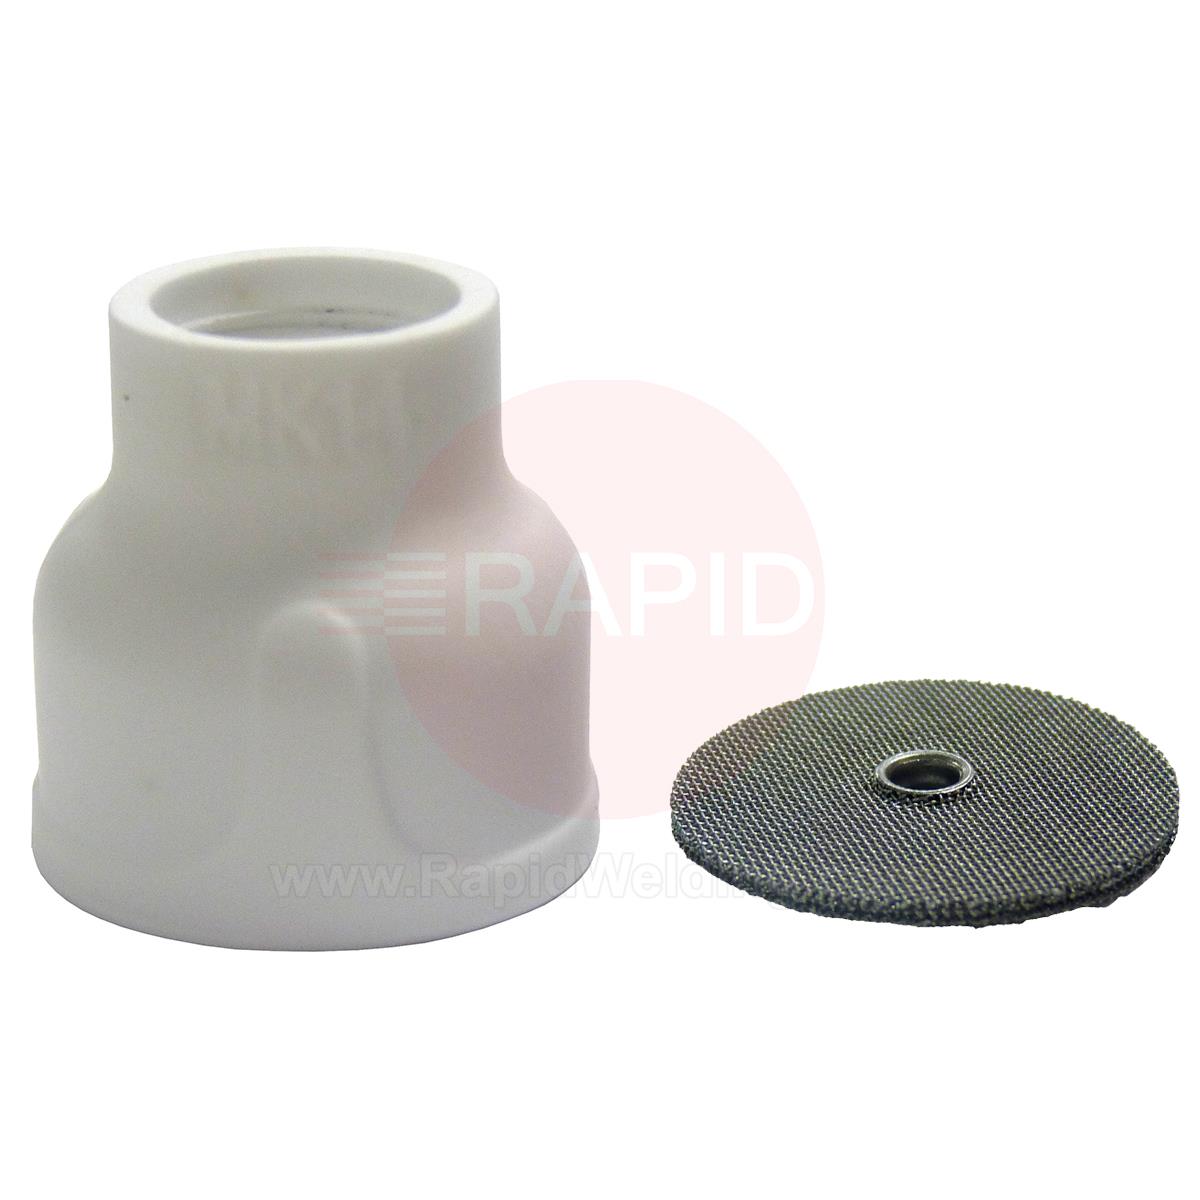 MK14KOKN  Furick Mooseknuckle 14 Ceramic Cup Kit for 2.4mm (1x Cup & 2x Diffusers)